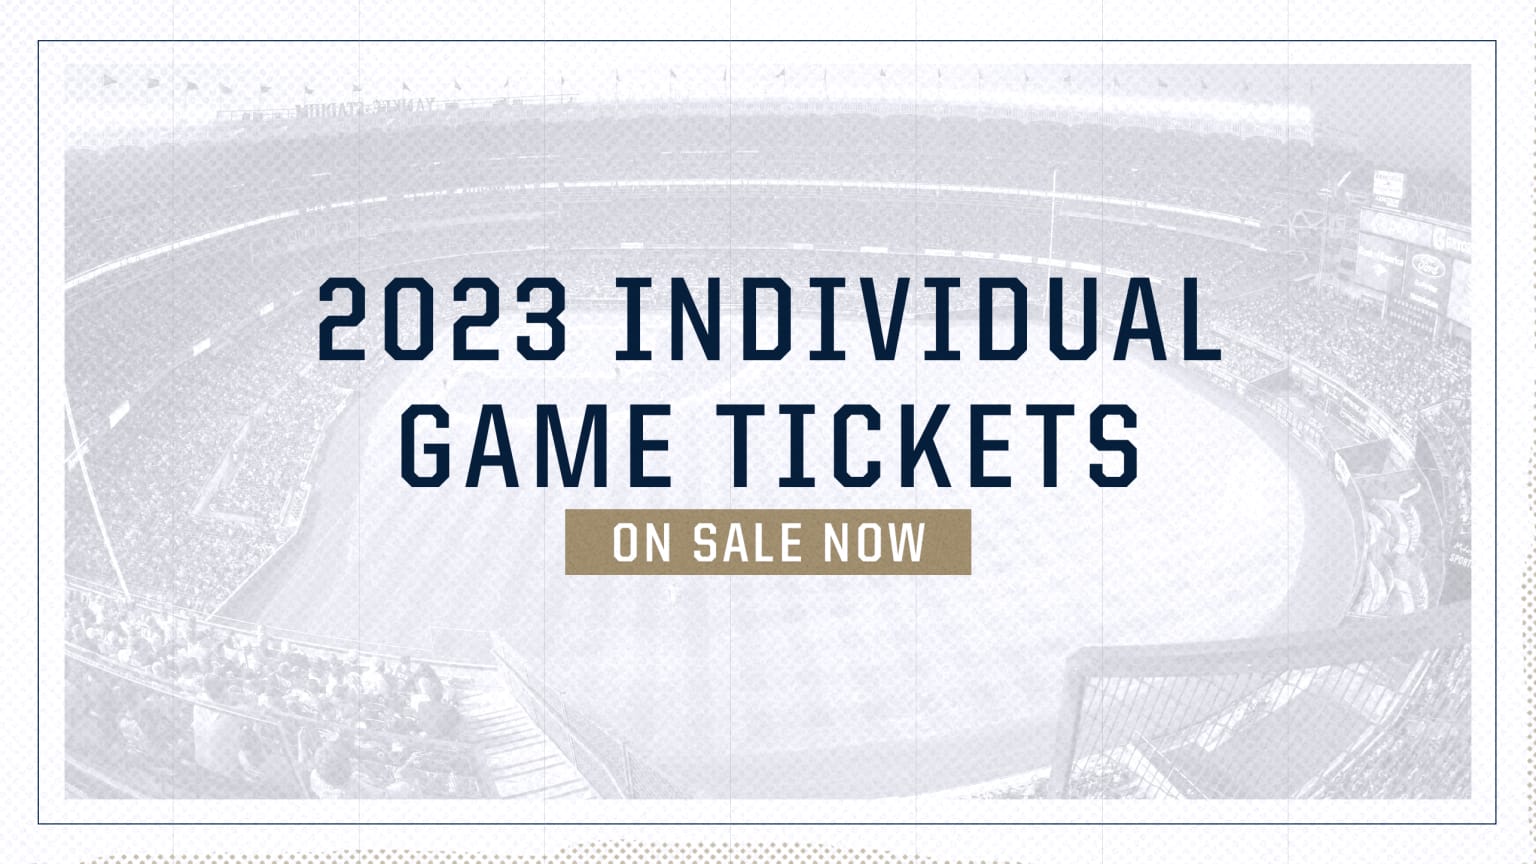 yankees promotional schedule 2023